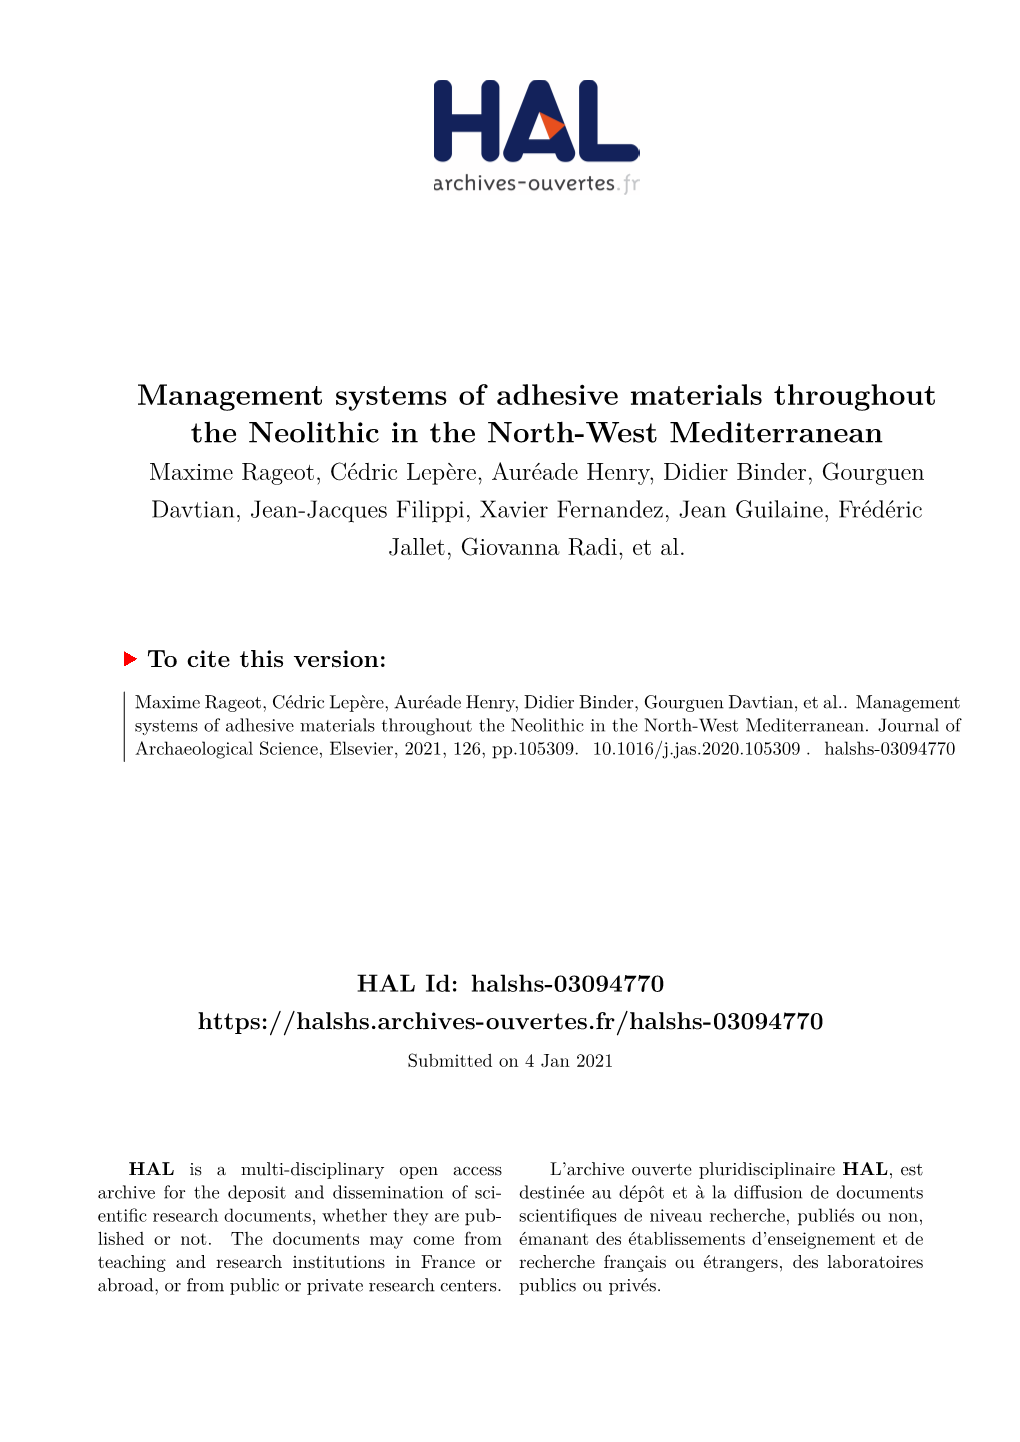 Management Systems of Adhesive Materials Throughout the Neolithic